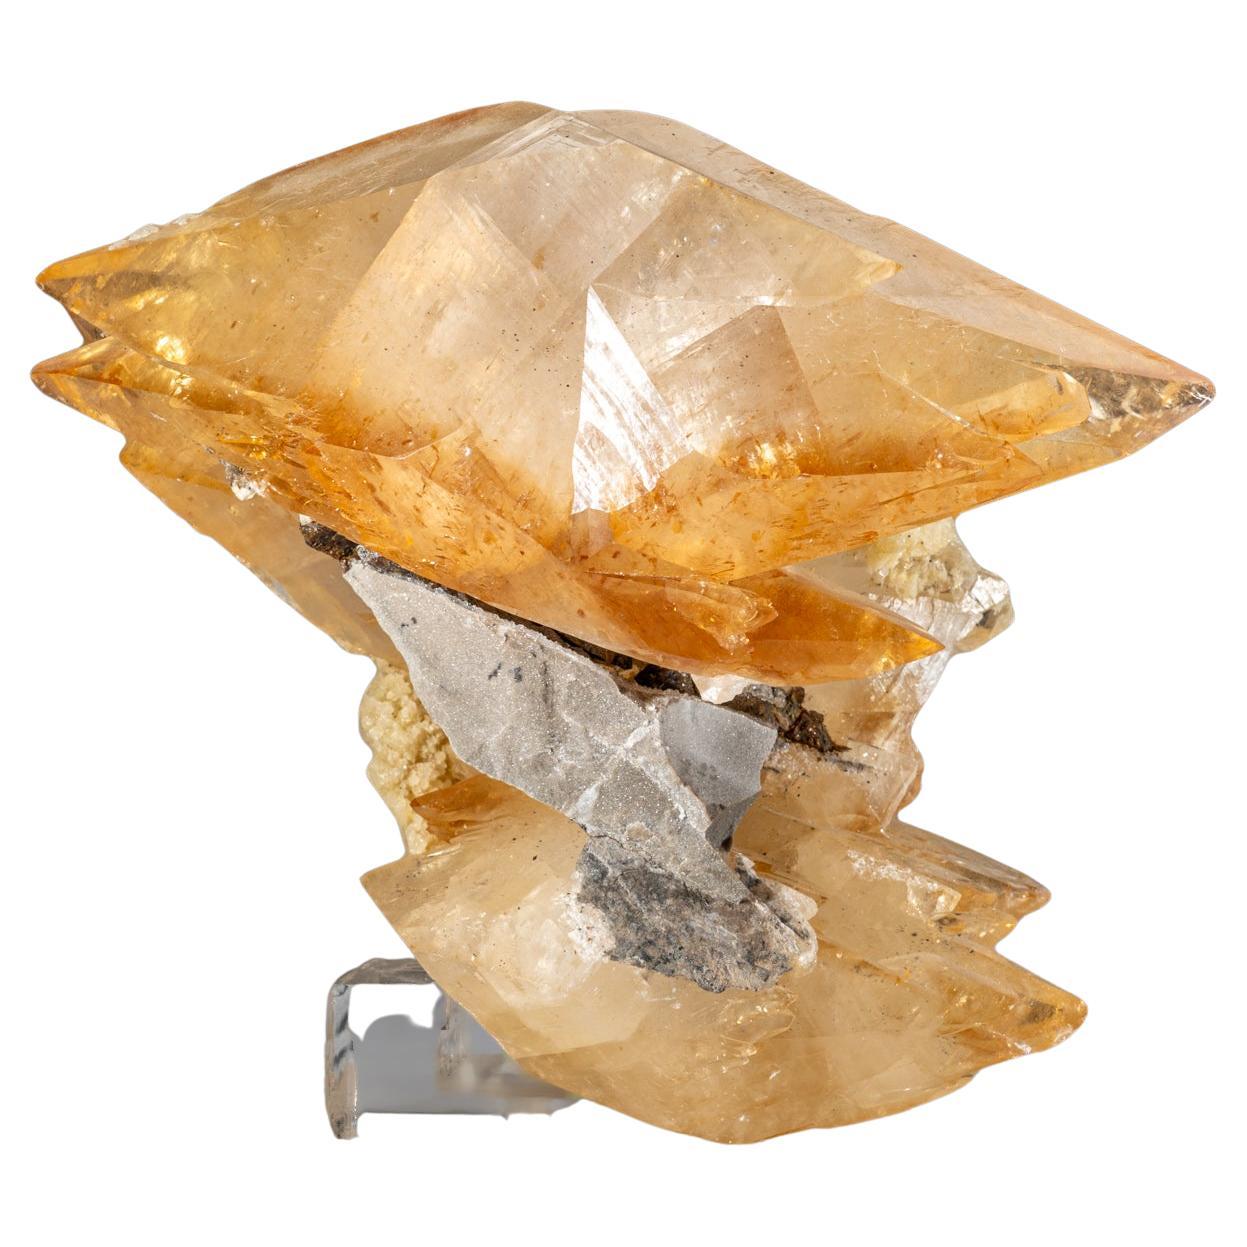 Golden Calcite Crystal from Elmwood Mine, Tennessee (5.15 lbs)